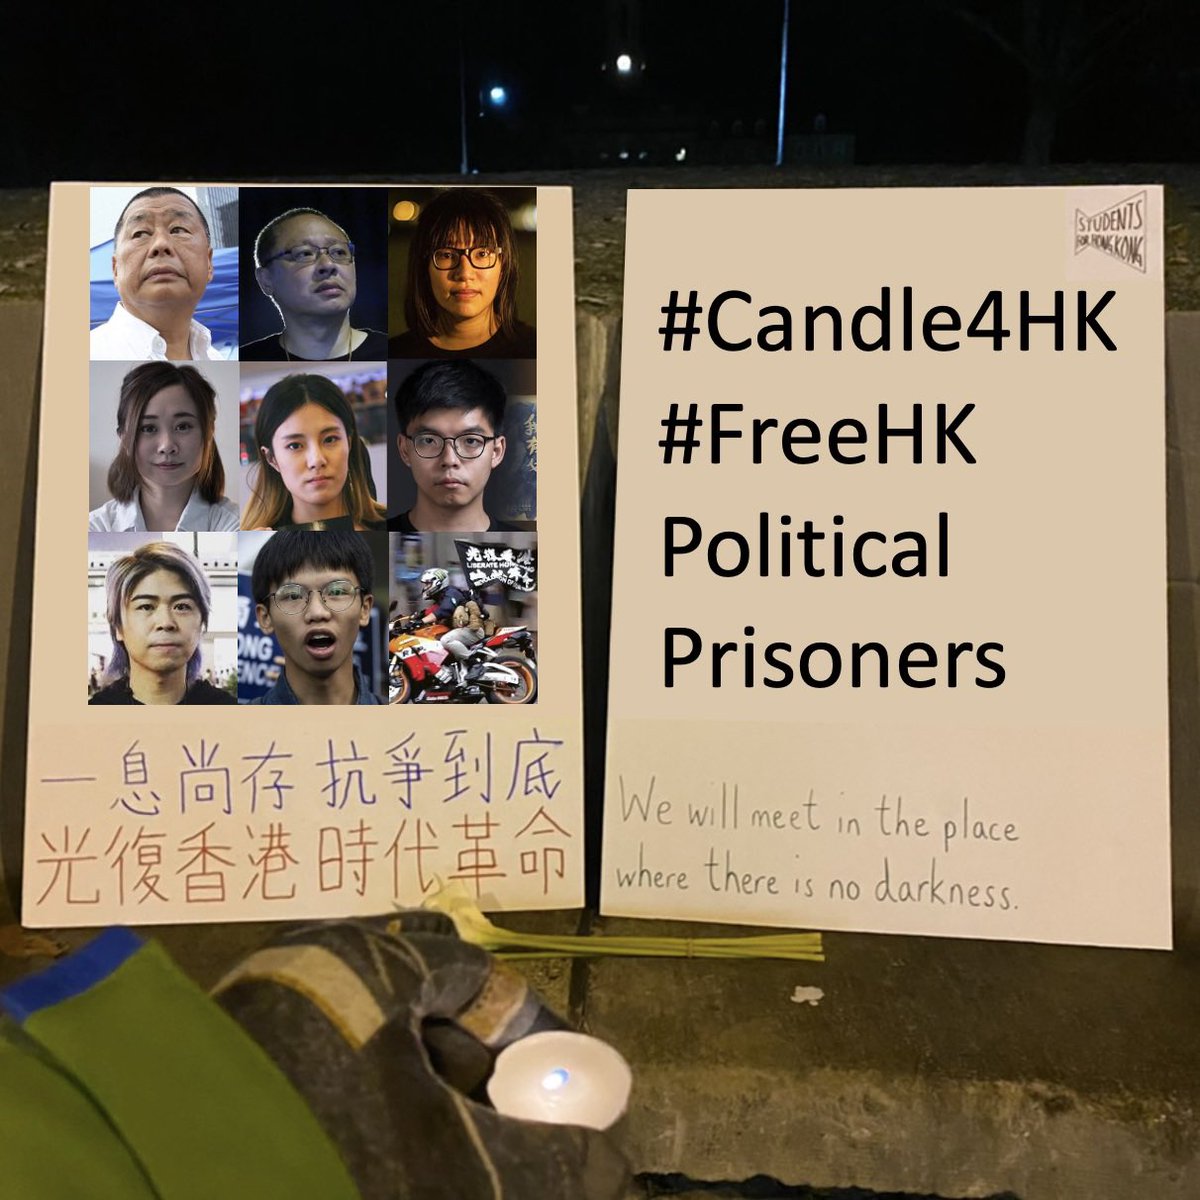 As we are celebrating Winter Solstice and Christmas with friends and family, many in Hong Kong are behind bars for fighting for freedom. 

Please light up a #Candle4HK to send warmth to them and remind the world to #FreeHKPoliticalPrisoners.